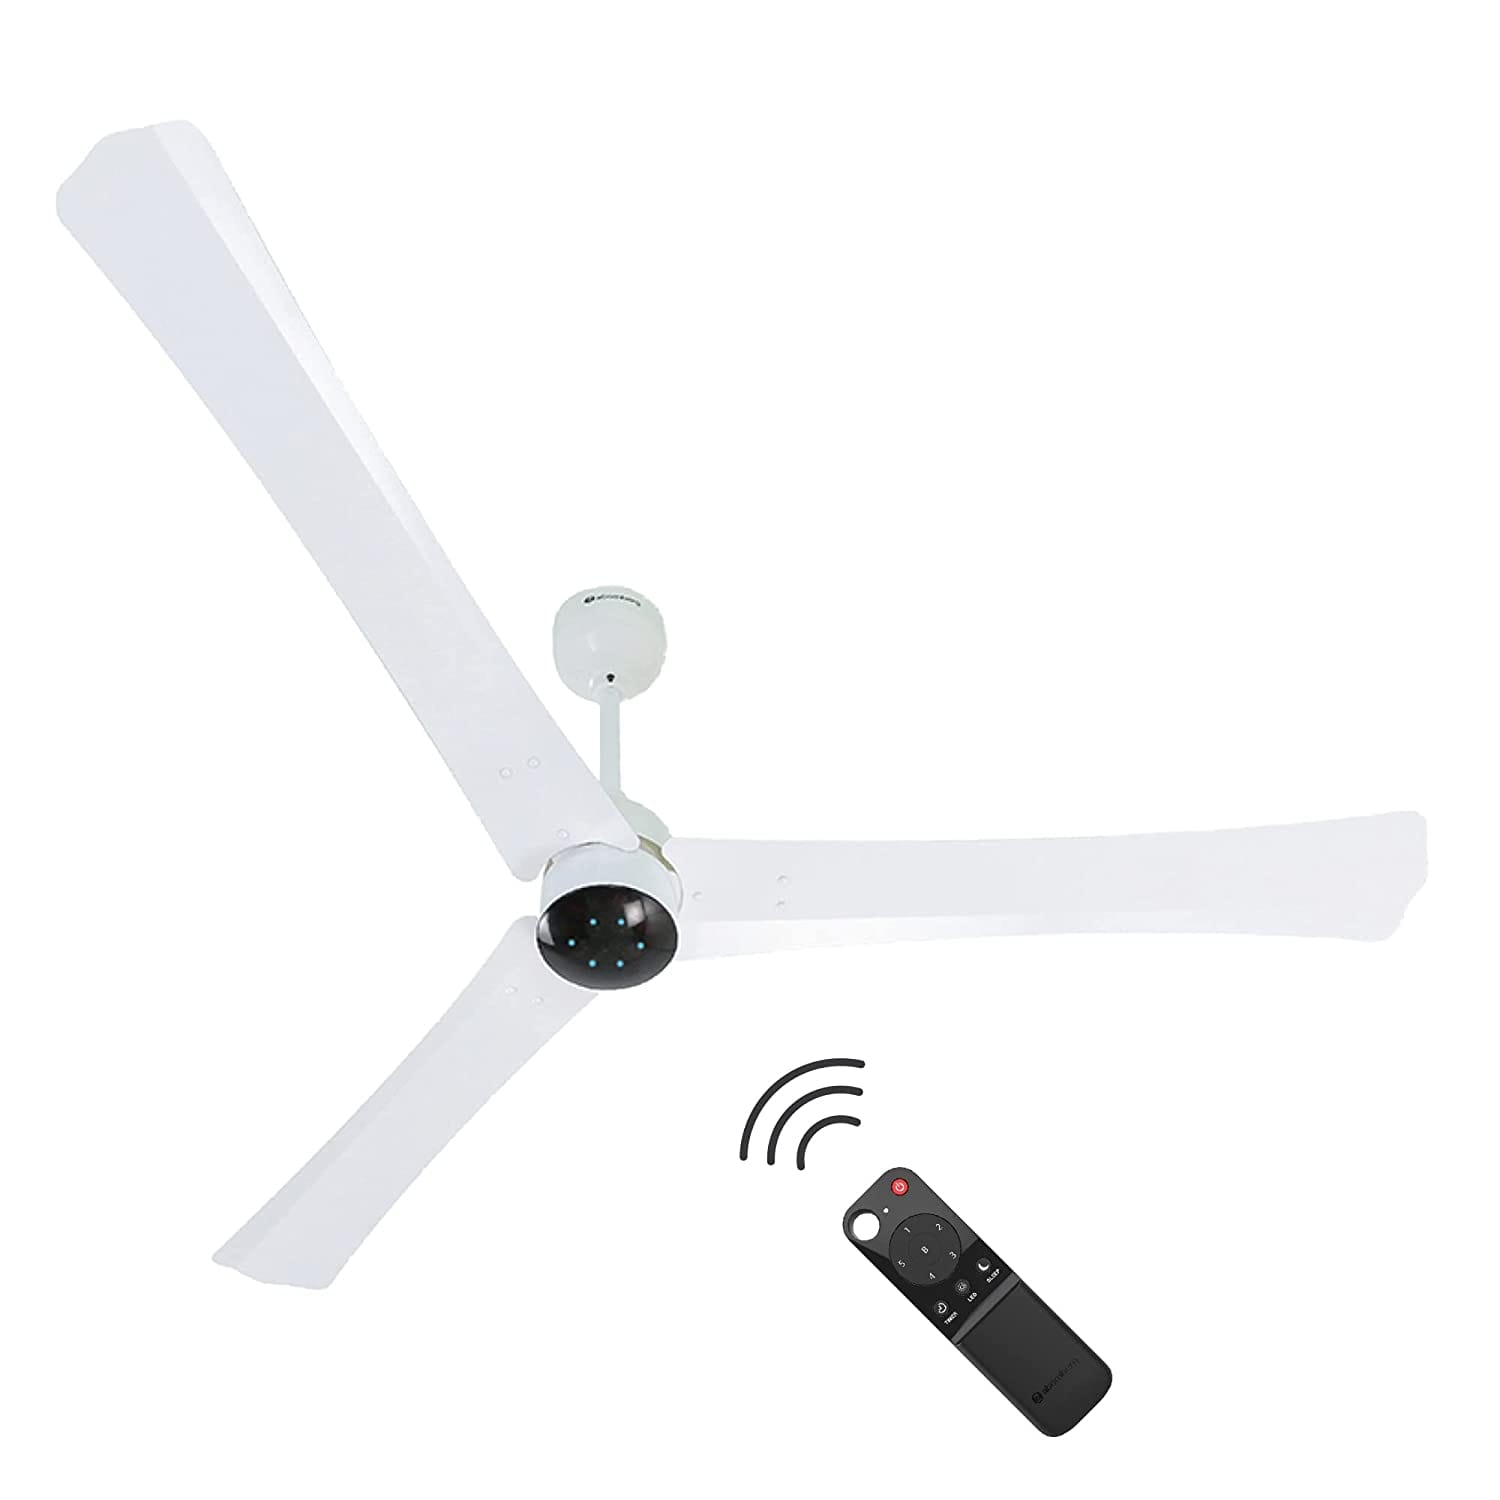 Atomberg Renesa+ 48" 32W BLDC motor Energy Saving Anti-Dust Speed Indicator Light  Ceiling Fan with Remote Control (Pearl White) AT-101